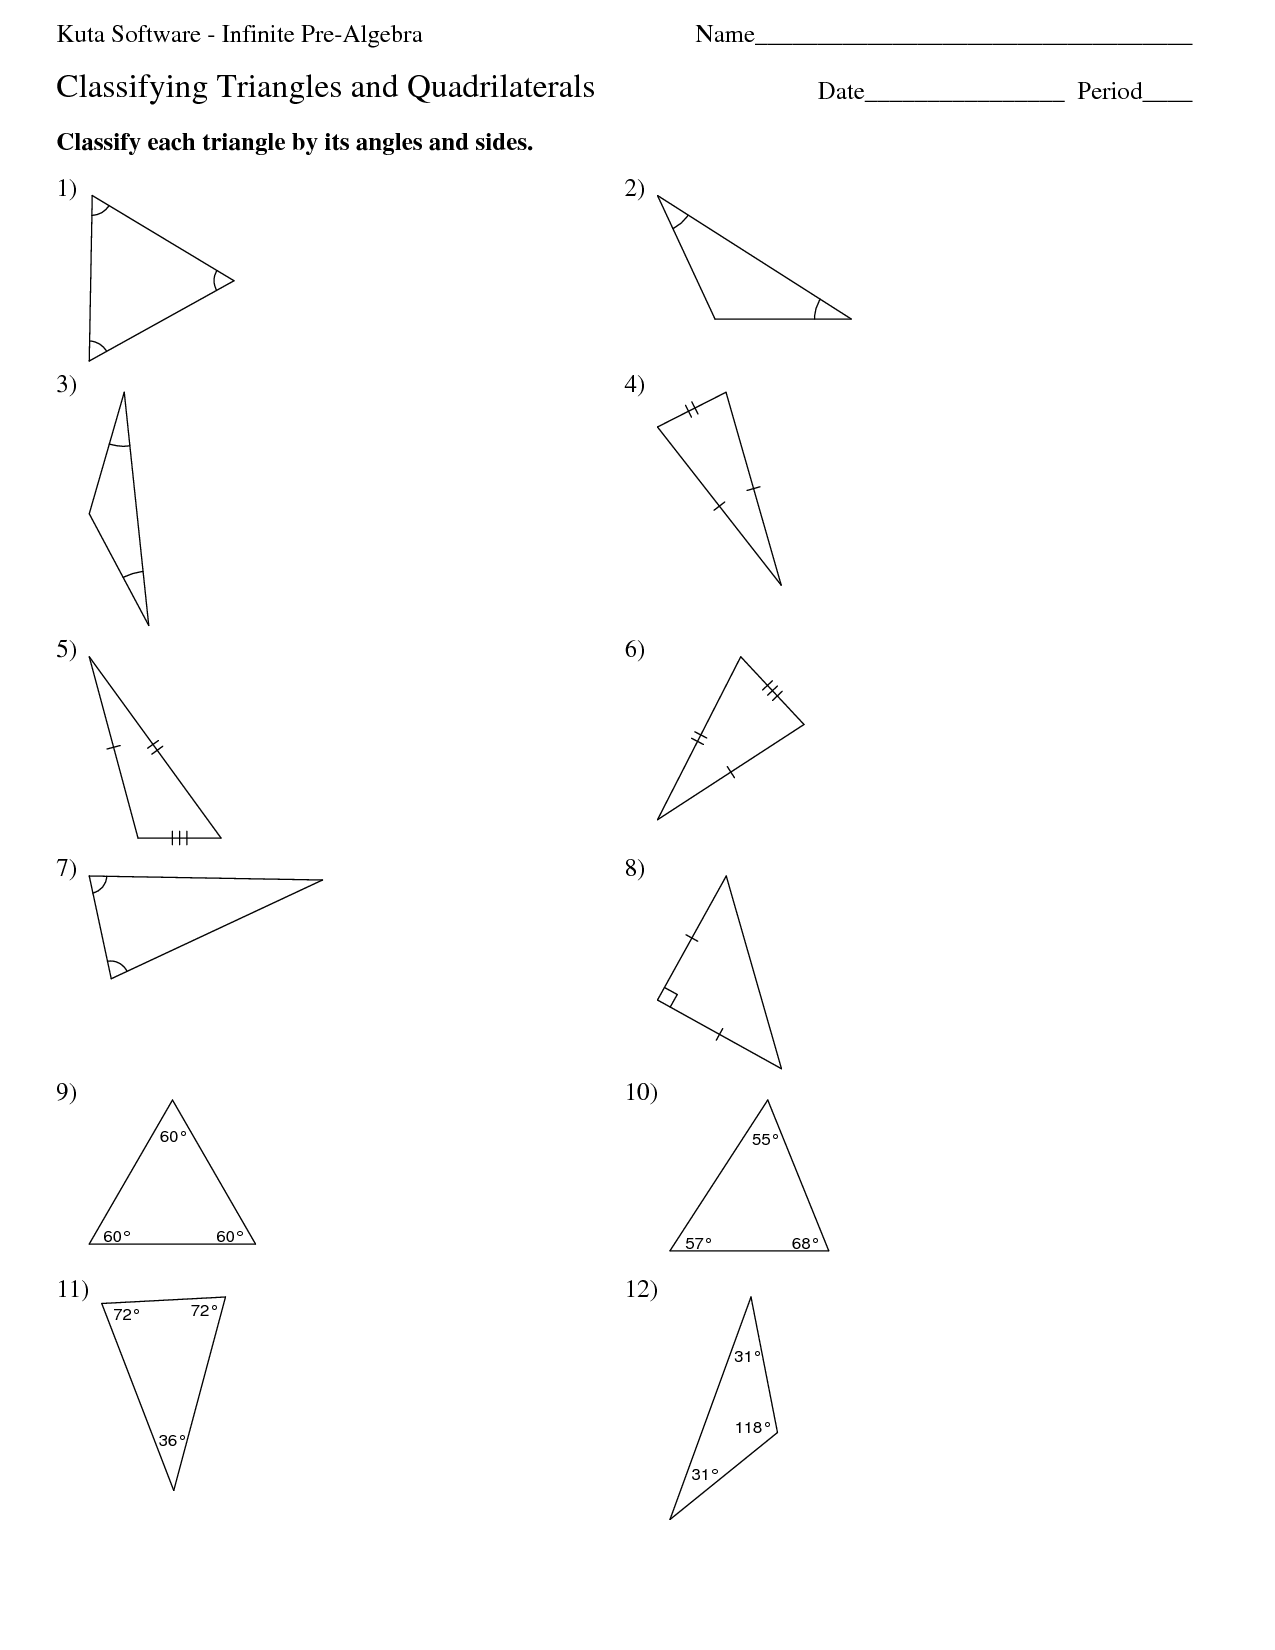 13 Best Images of Classifying Triangles By Angles Worksheet